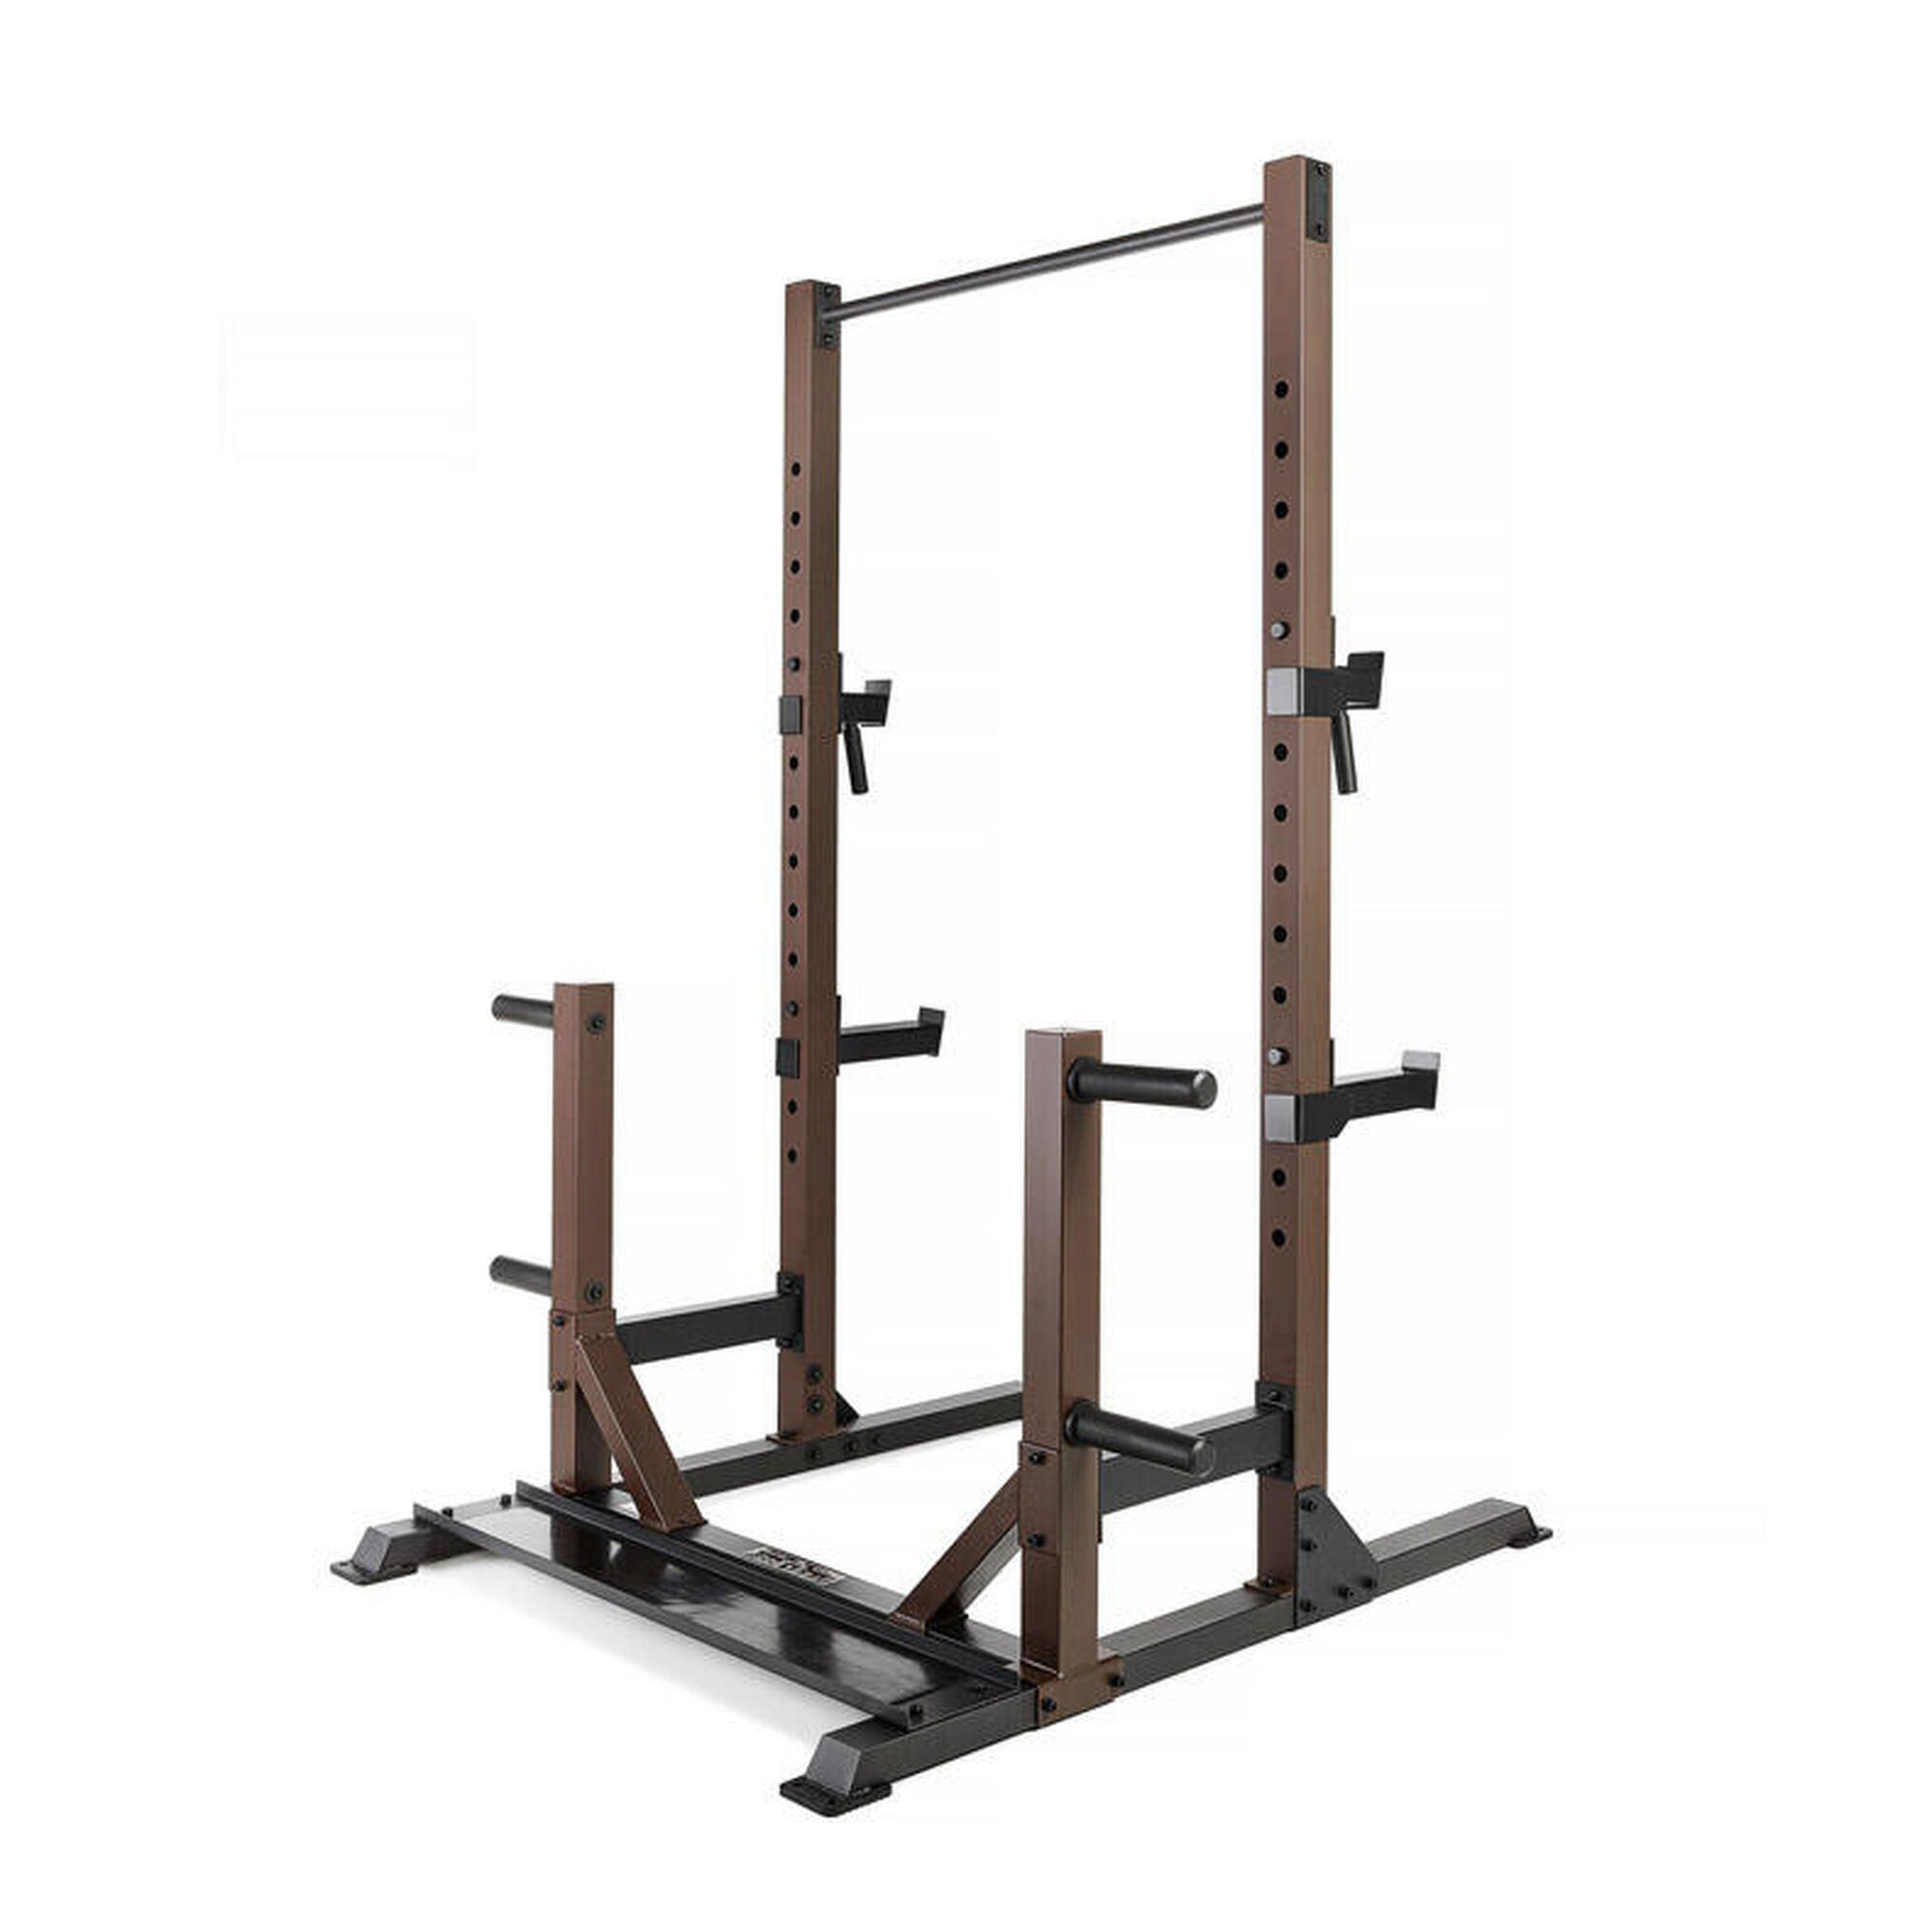 STEELBODY STB-98010 LIGHT COMMERCIAL POWER RACK/UTILITY WEIGHT TRAINER 2/7